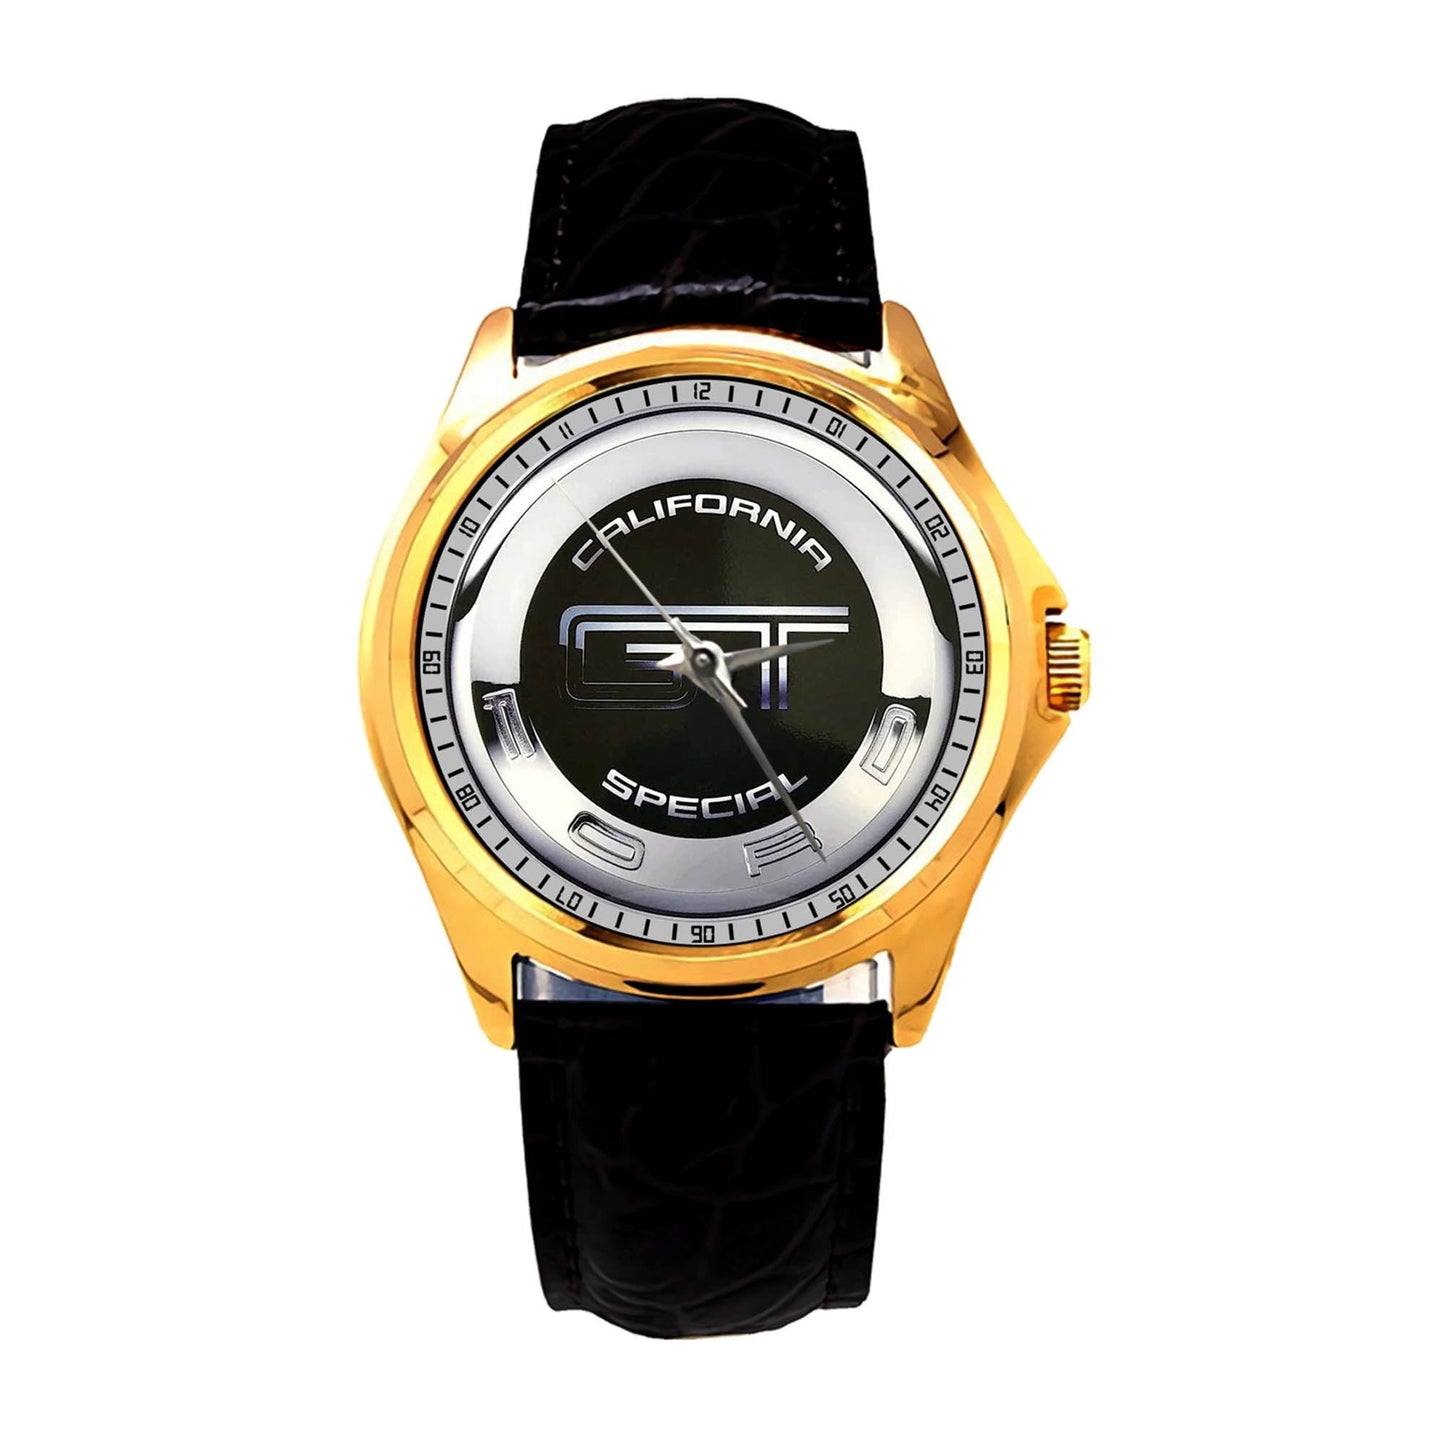 Ford Mustang GT California Special Watches KP449